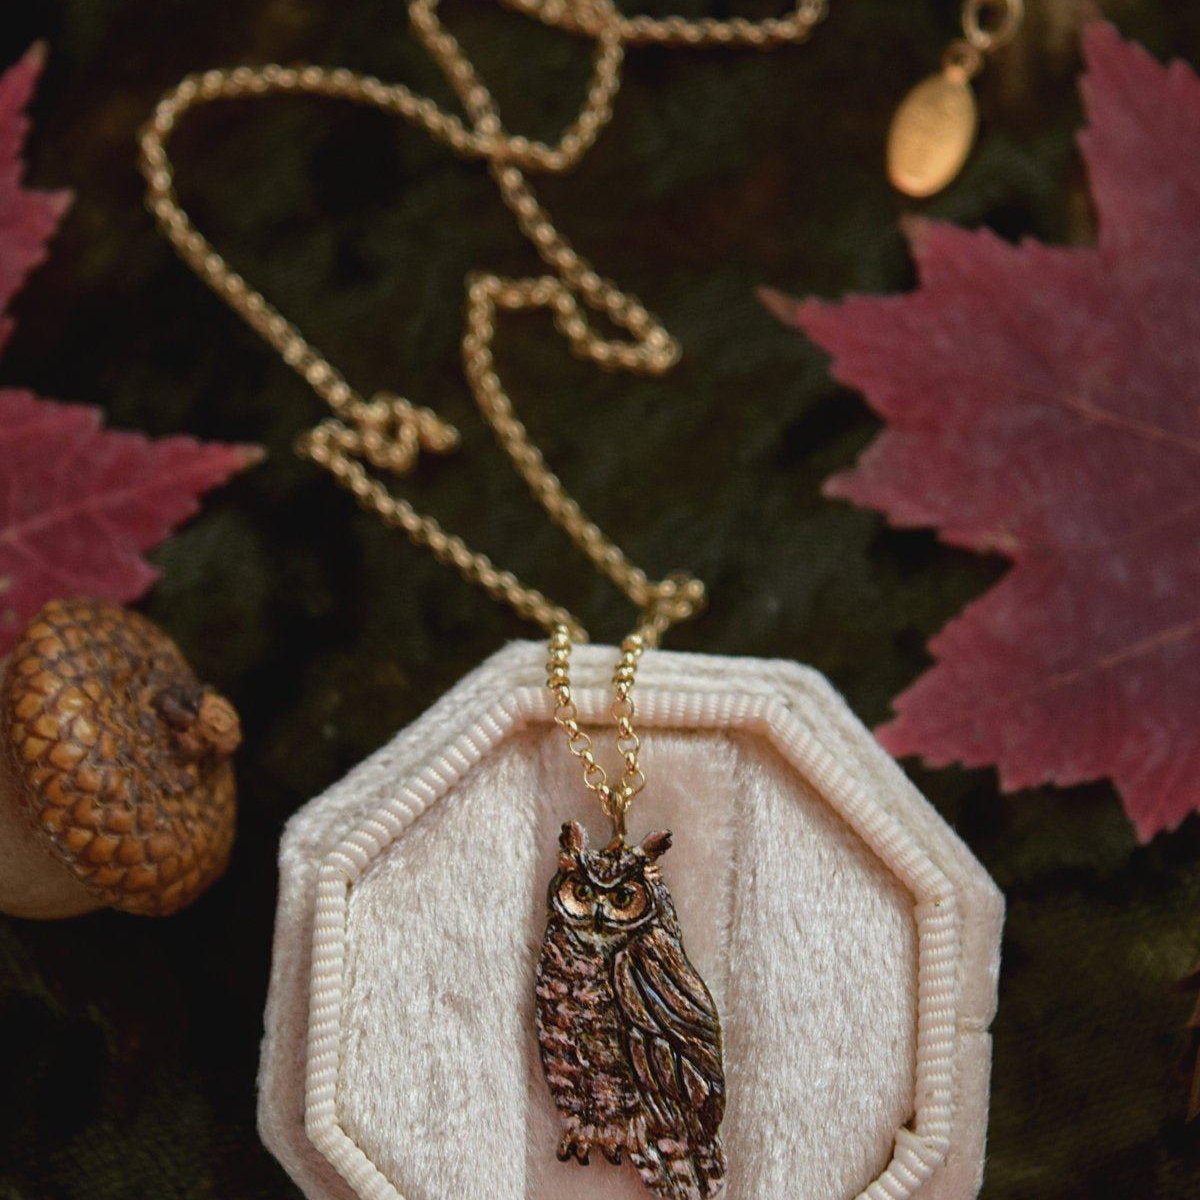 Owl Necklace - Enameled Bronze Great Horned Owl Pendant - Small, Dainty Bird Charm Necklace - Owl Lover Gift, Cottagecore- by Woodland Belle